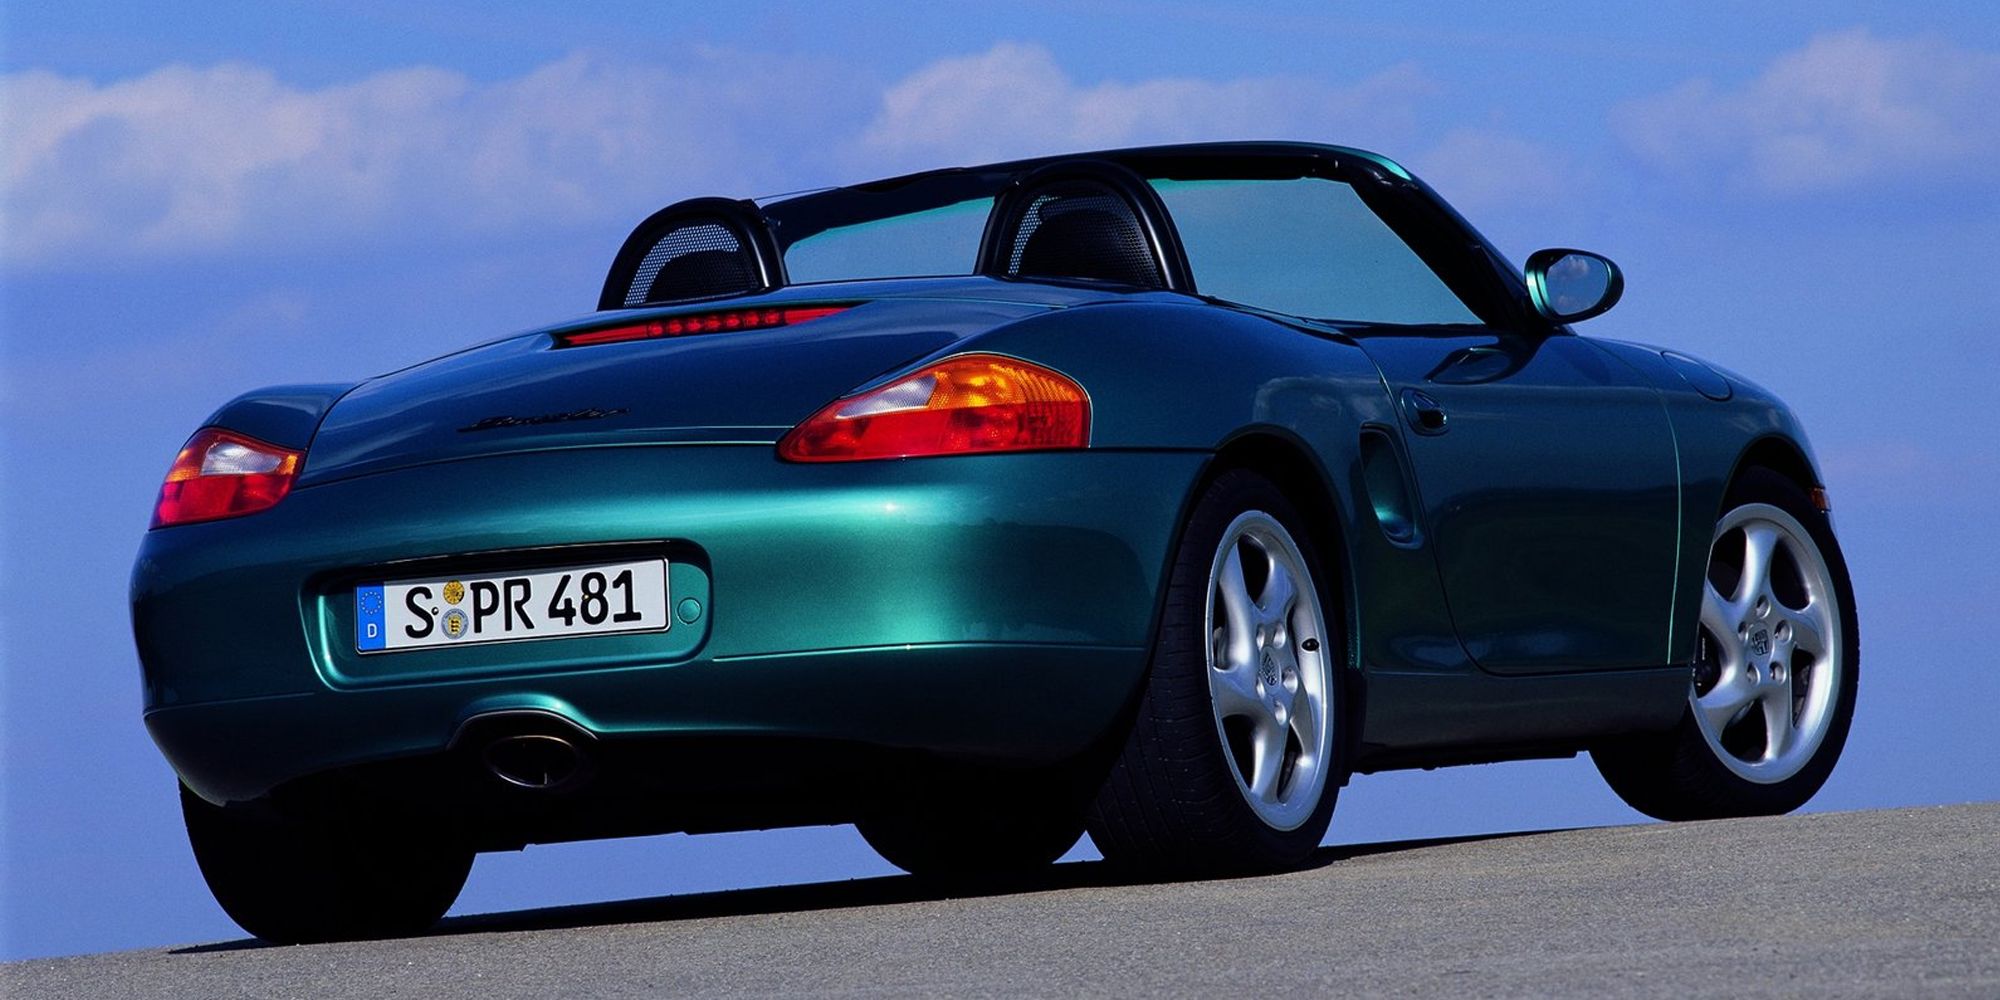 The rear of the original Boxster